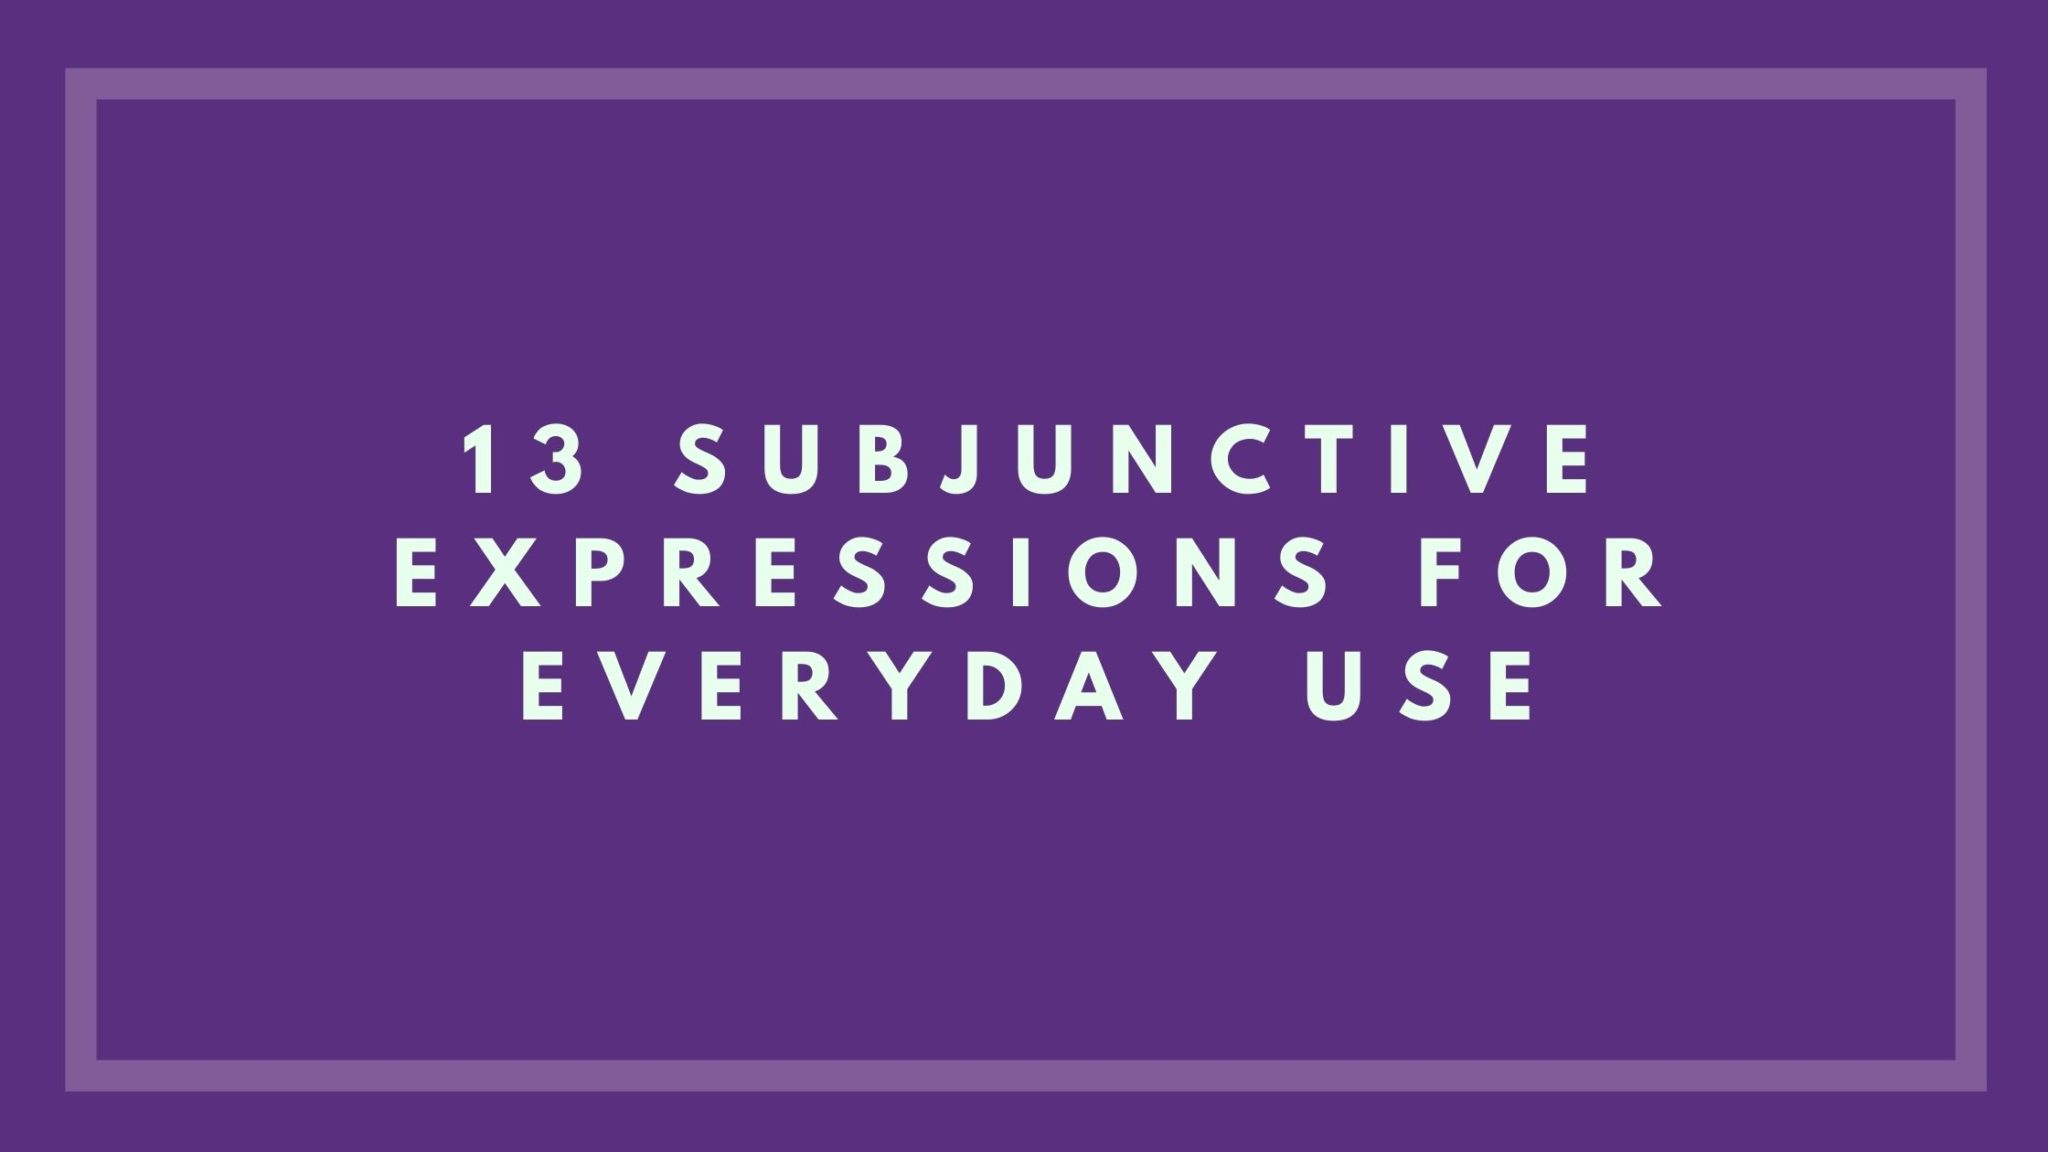 13-subjunctive-expressions-for-everyday-use-helping-you-learn-spanish